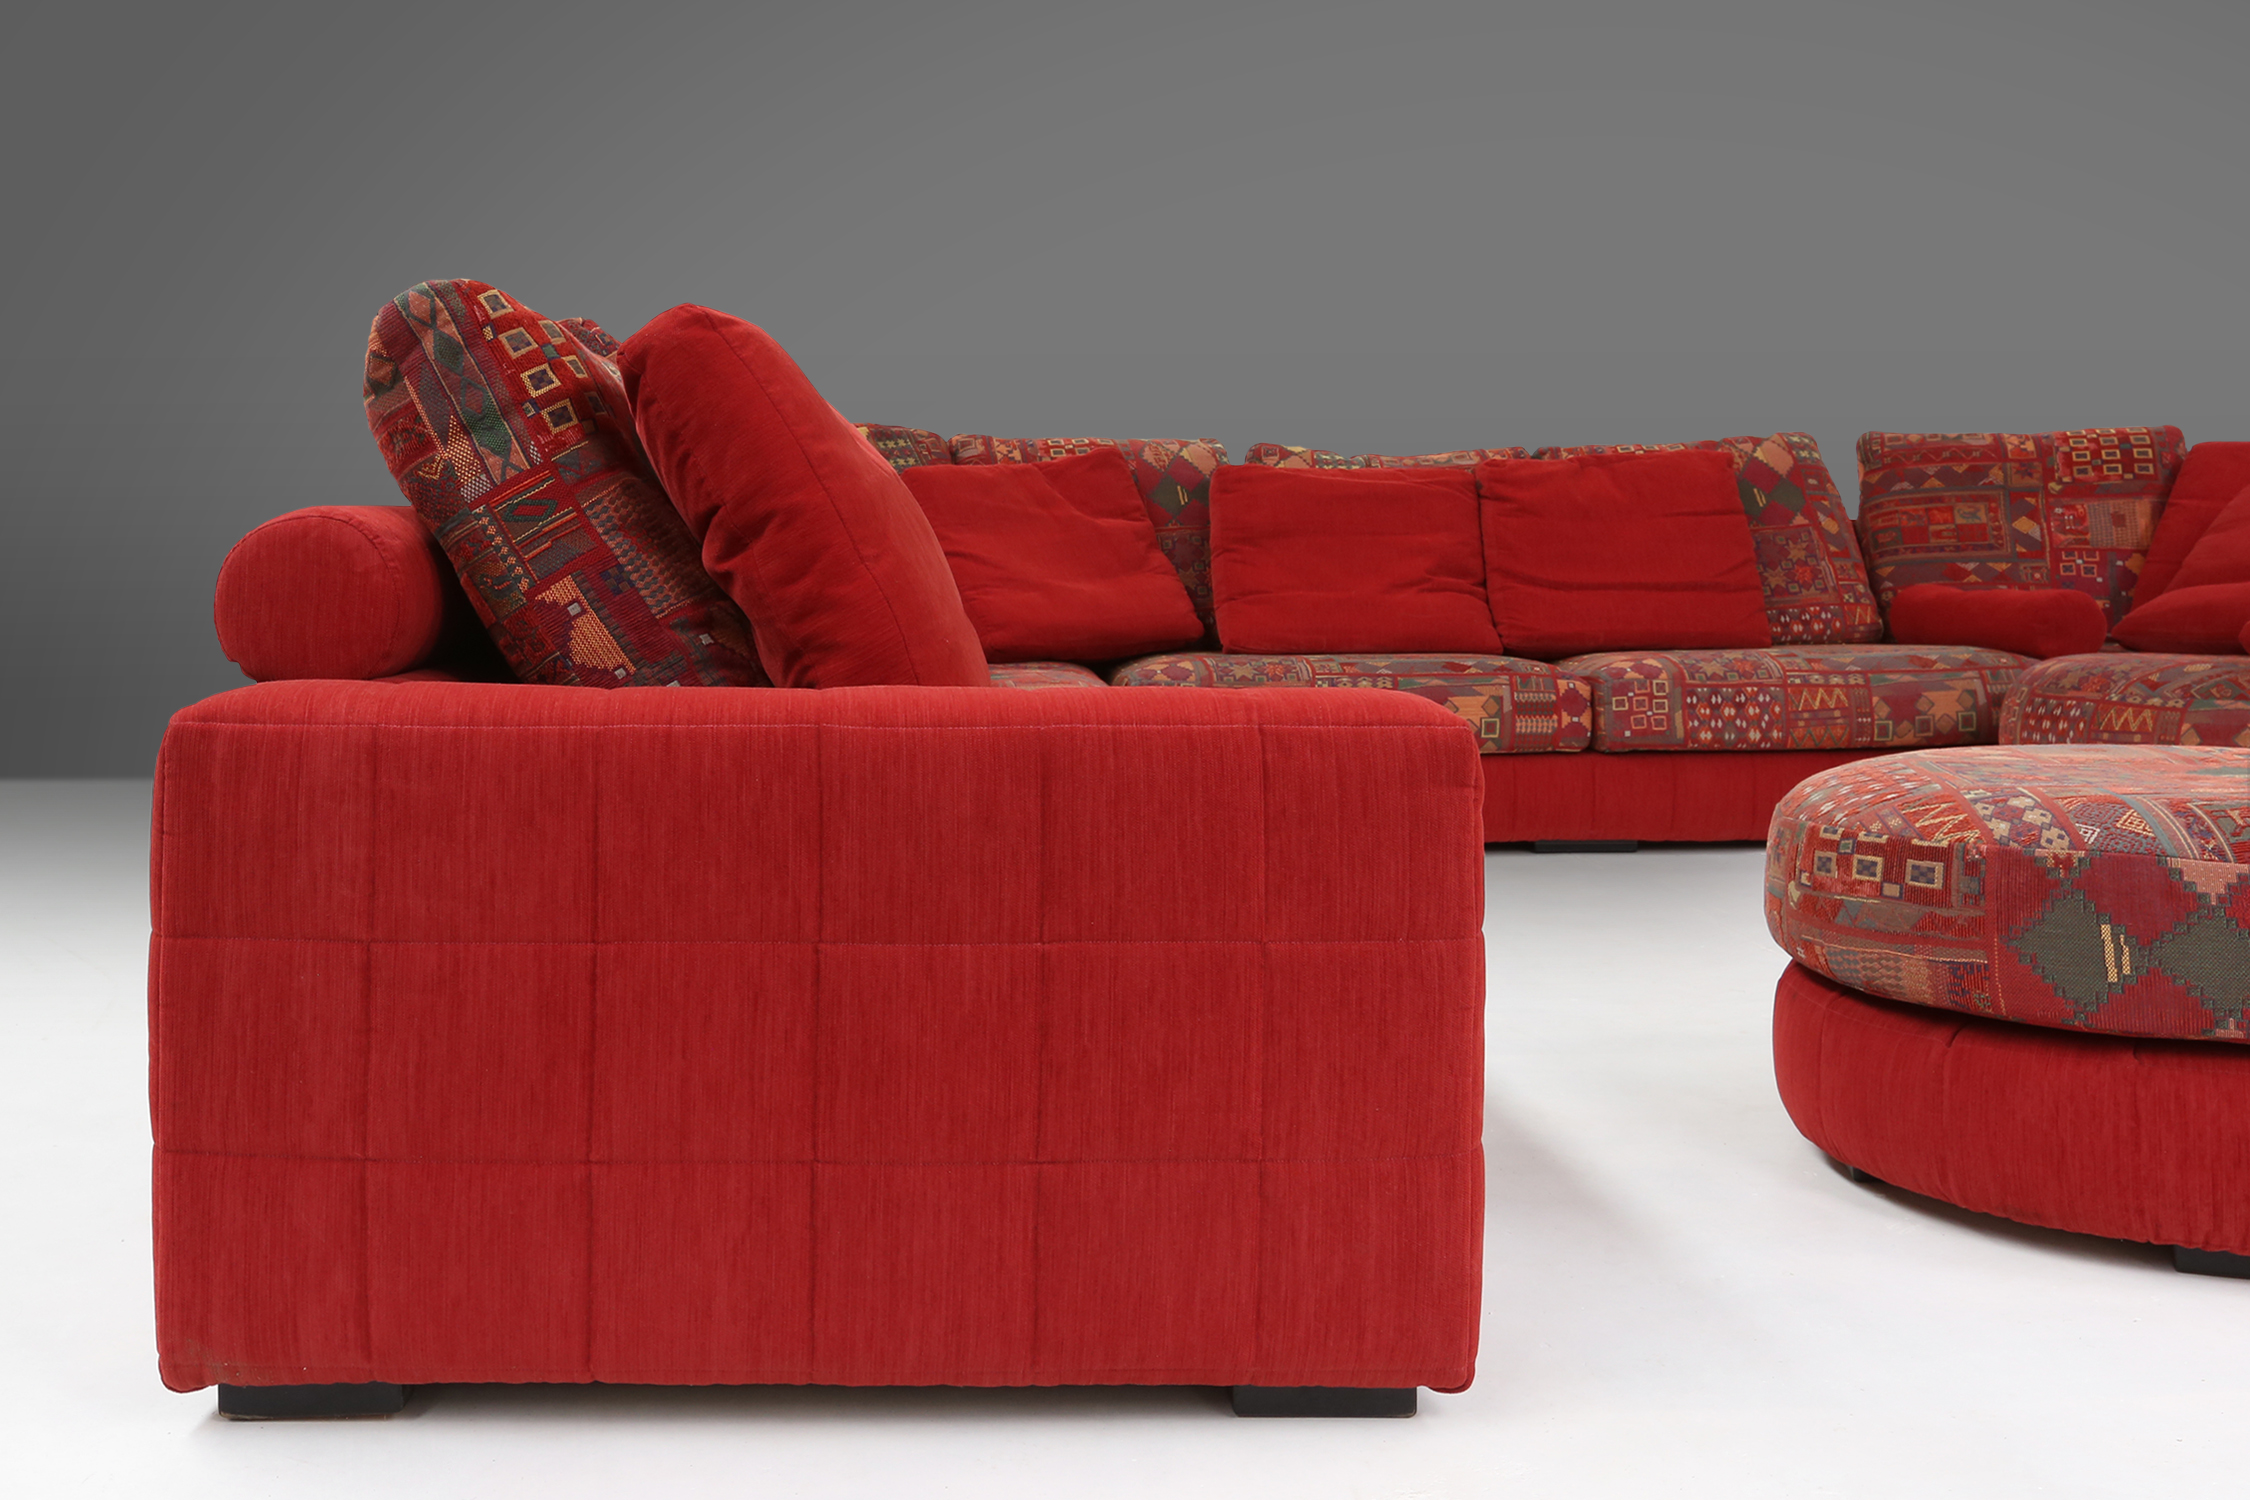 Roche Bobois modular sofa in red and patterned upholstery 1980thumbnail